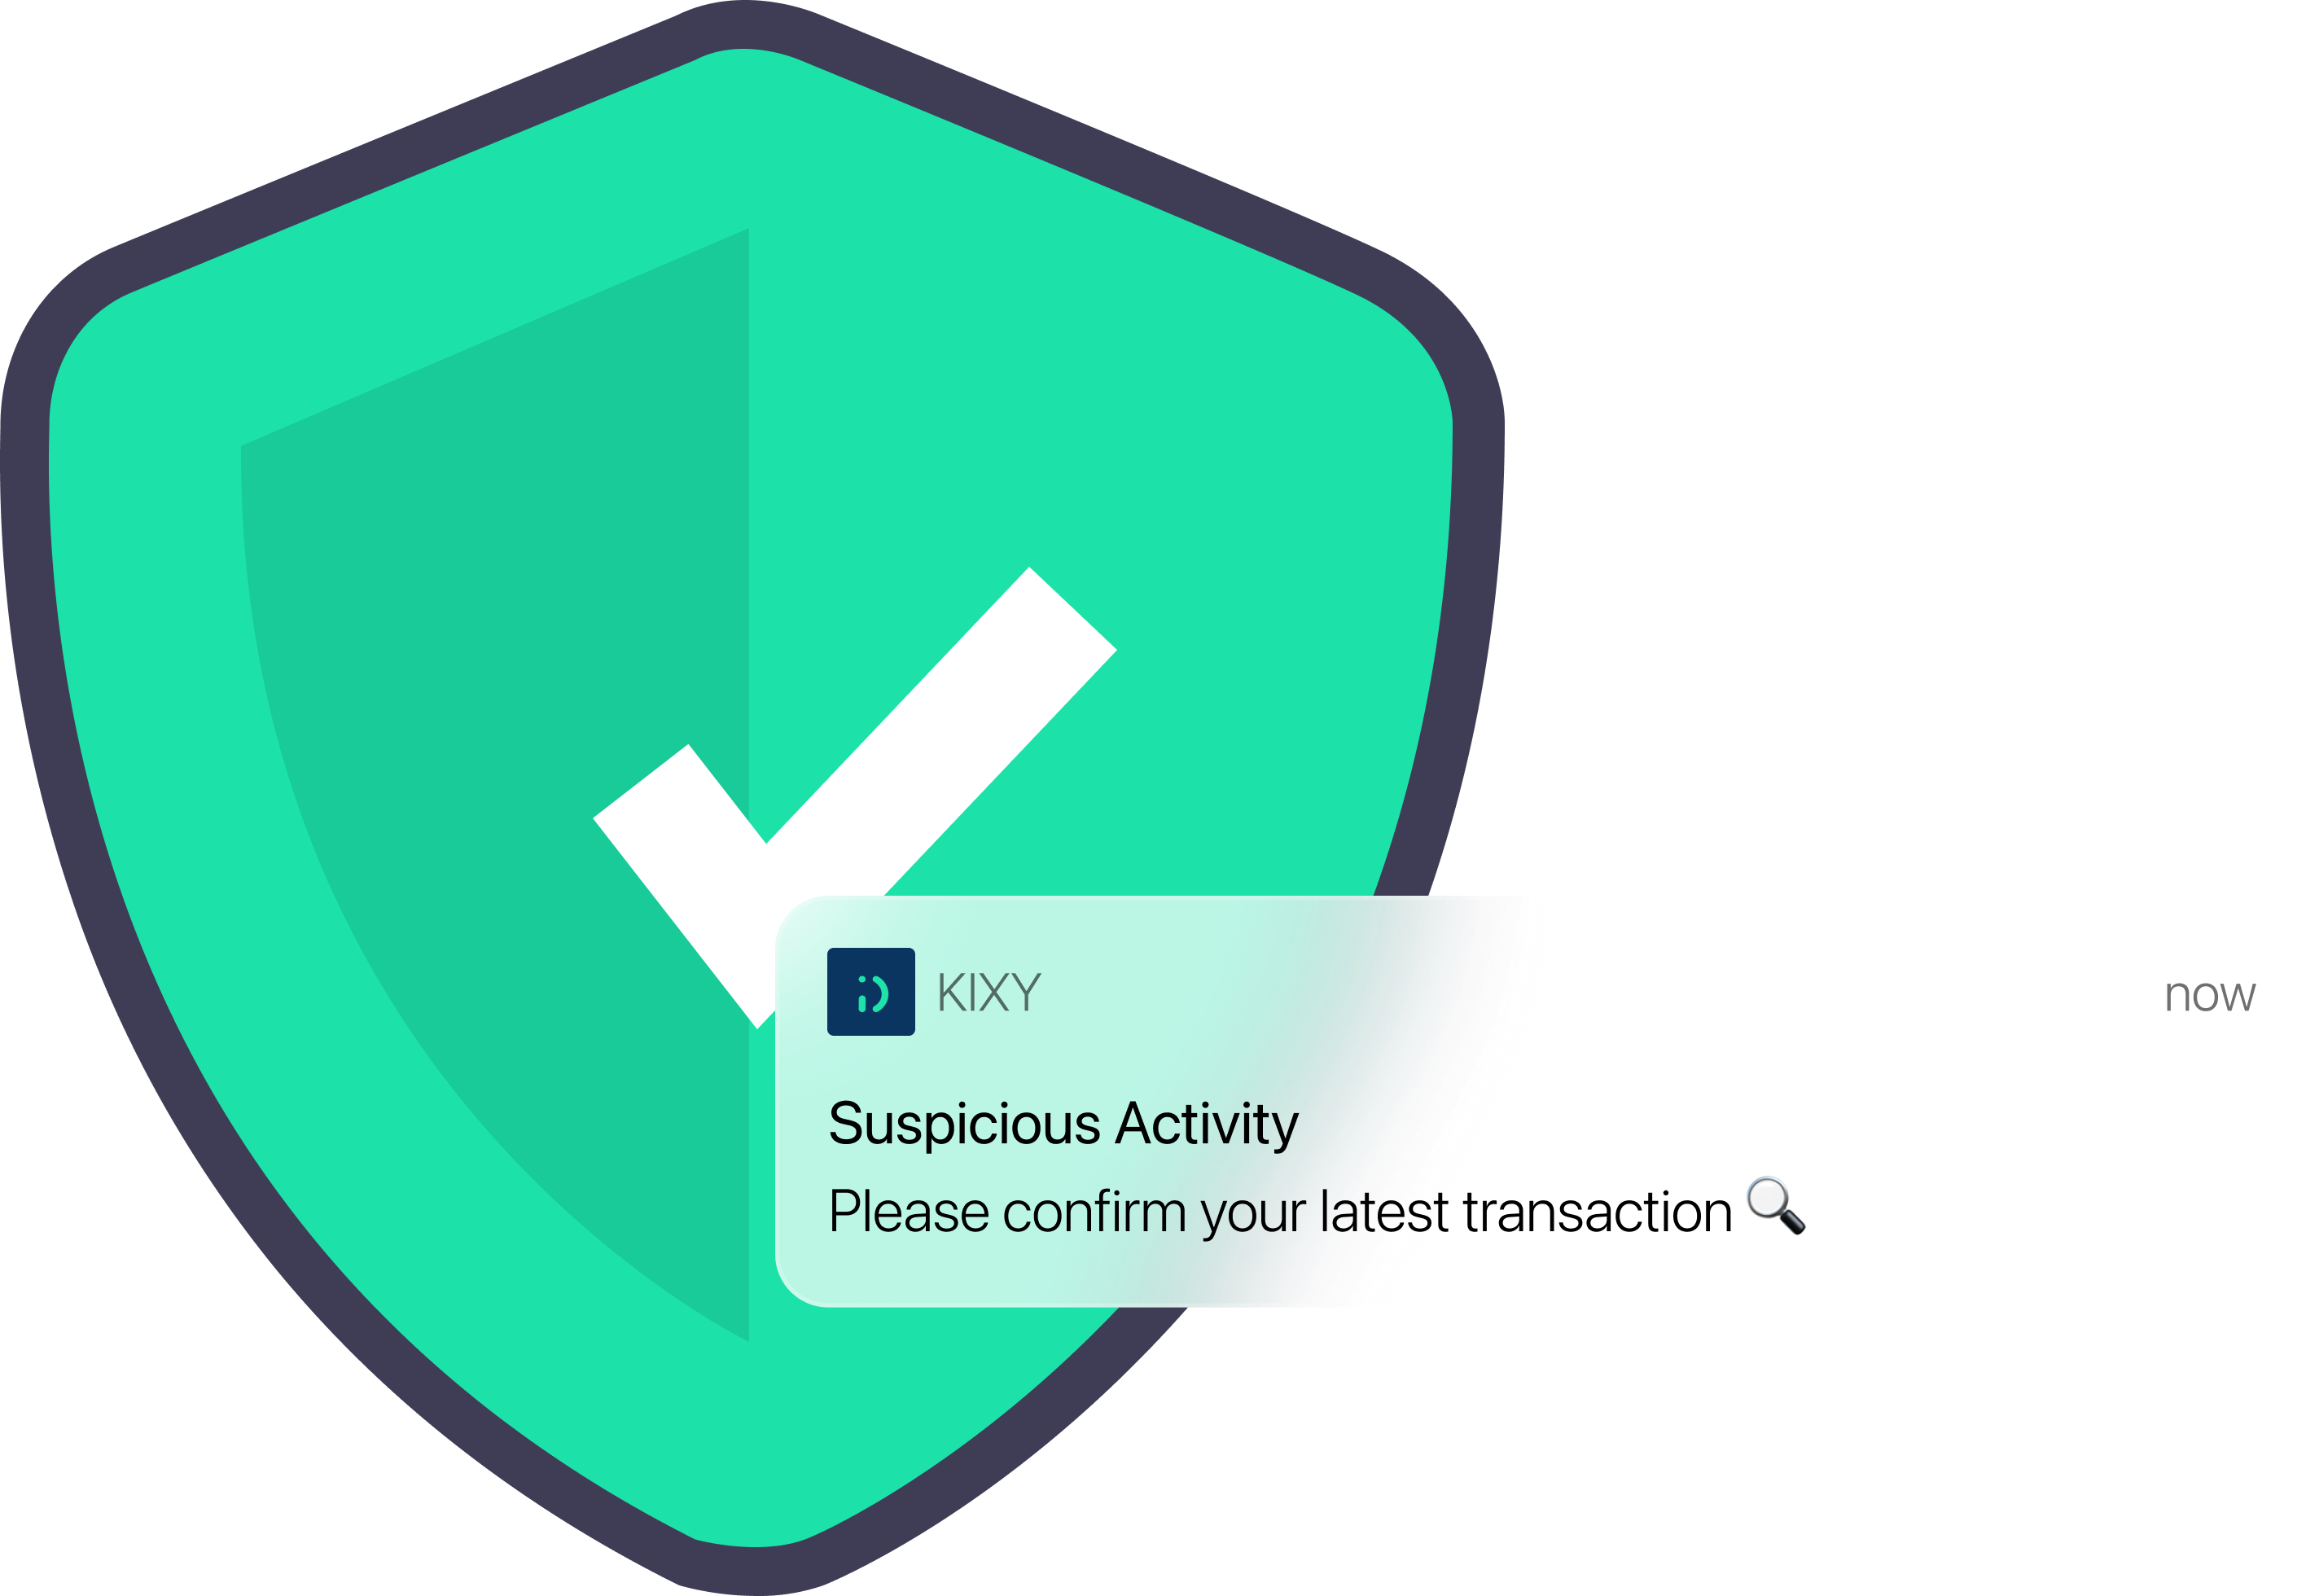 privacy feature and fraud alert notification